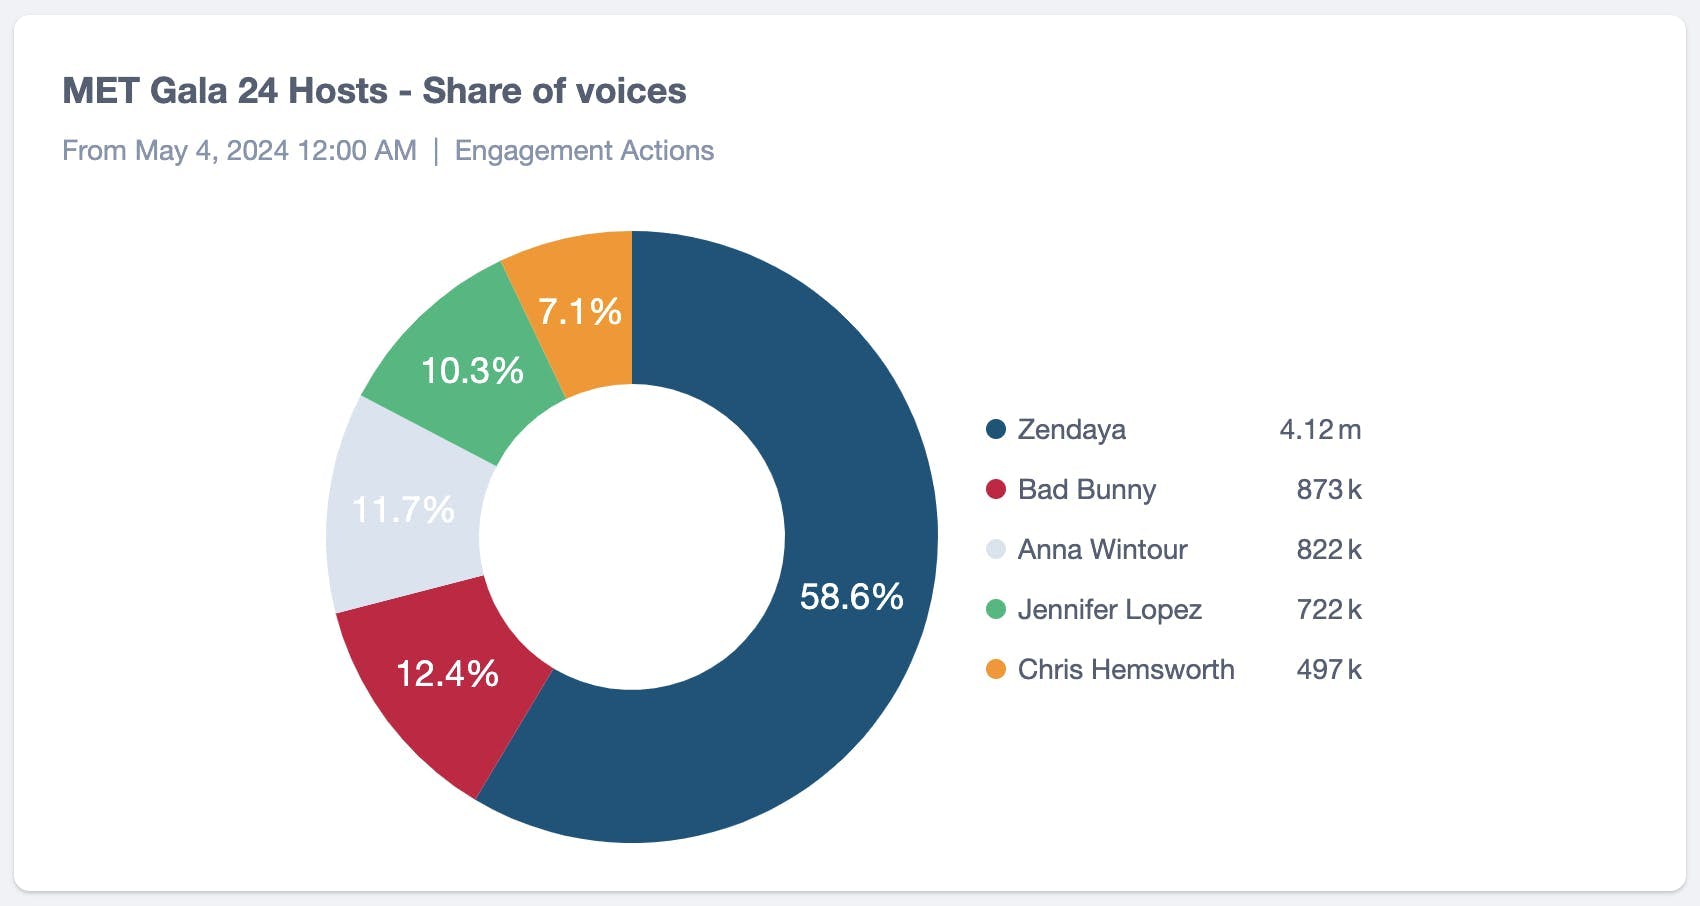 A ring chart showing that Zendaya was the Met Gala host that had the highest share of voice followed by Bad Bunny, Anna Wintour, Jennifer Lopez, and Chris Hemsworth.